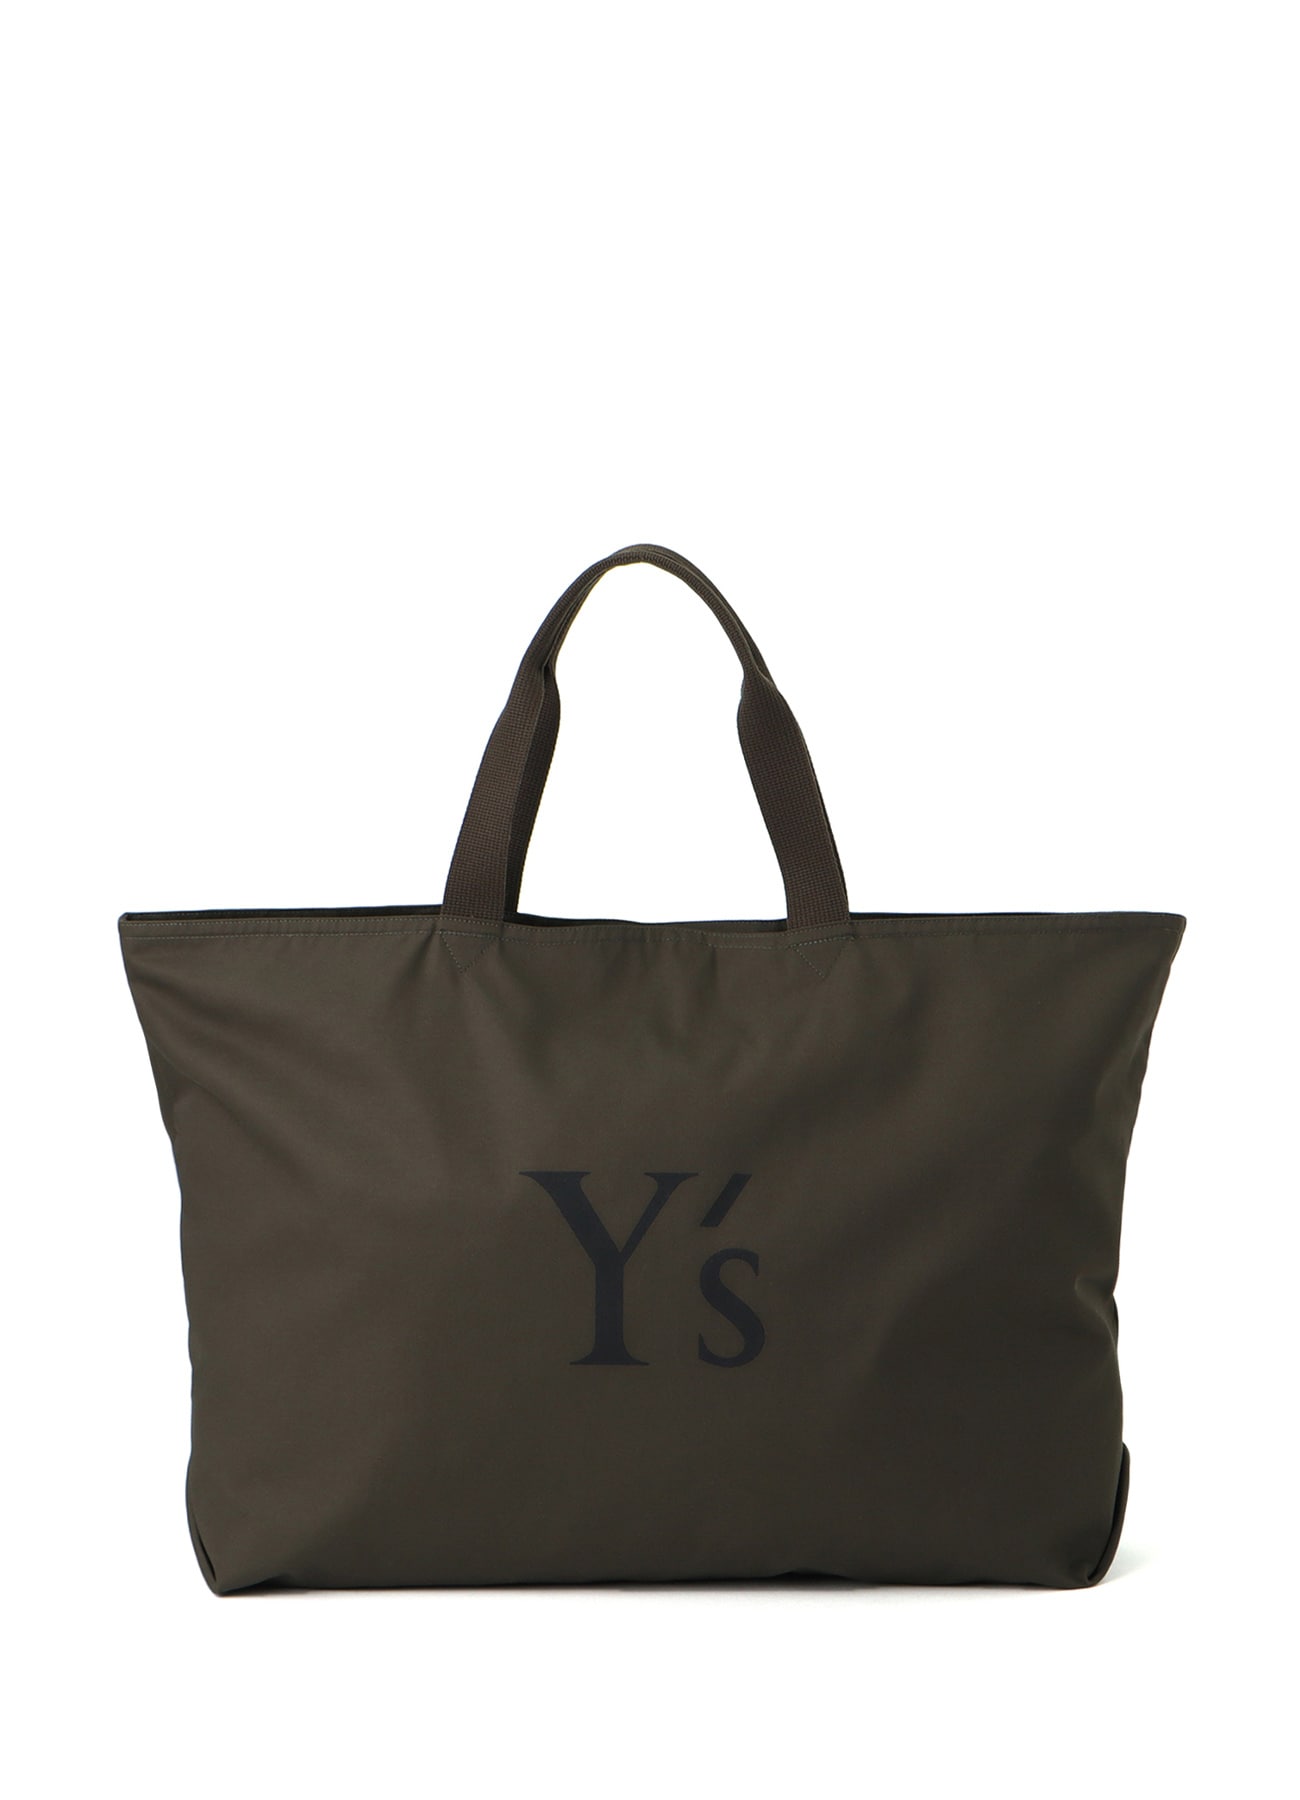 POLYESTER COTTON TWILL LEASE BAG